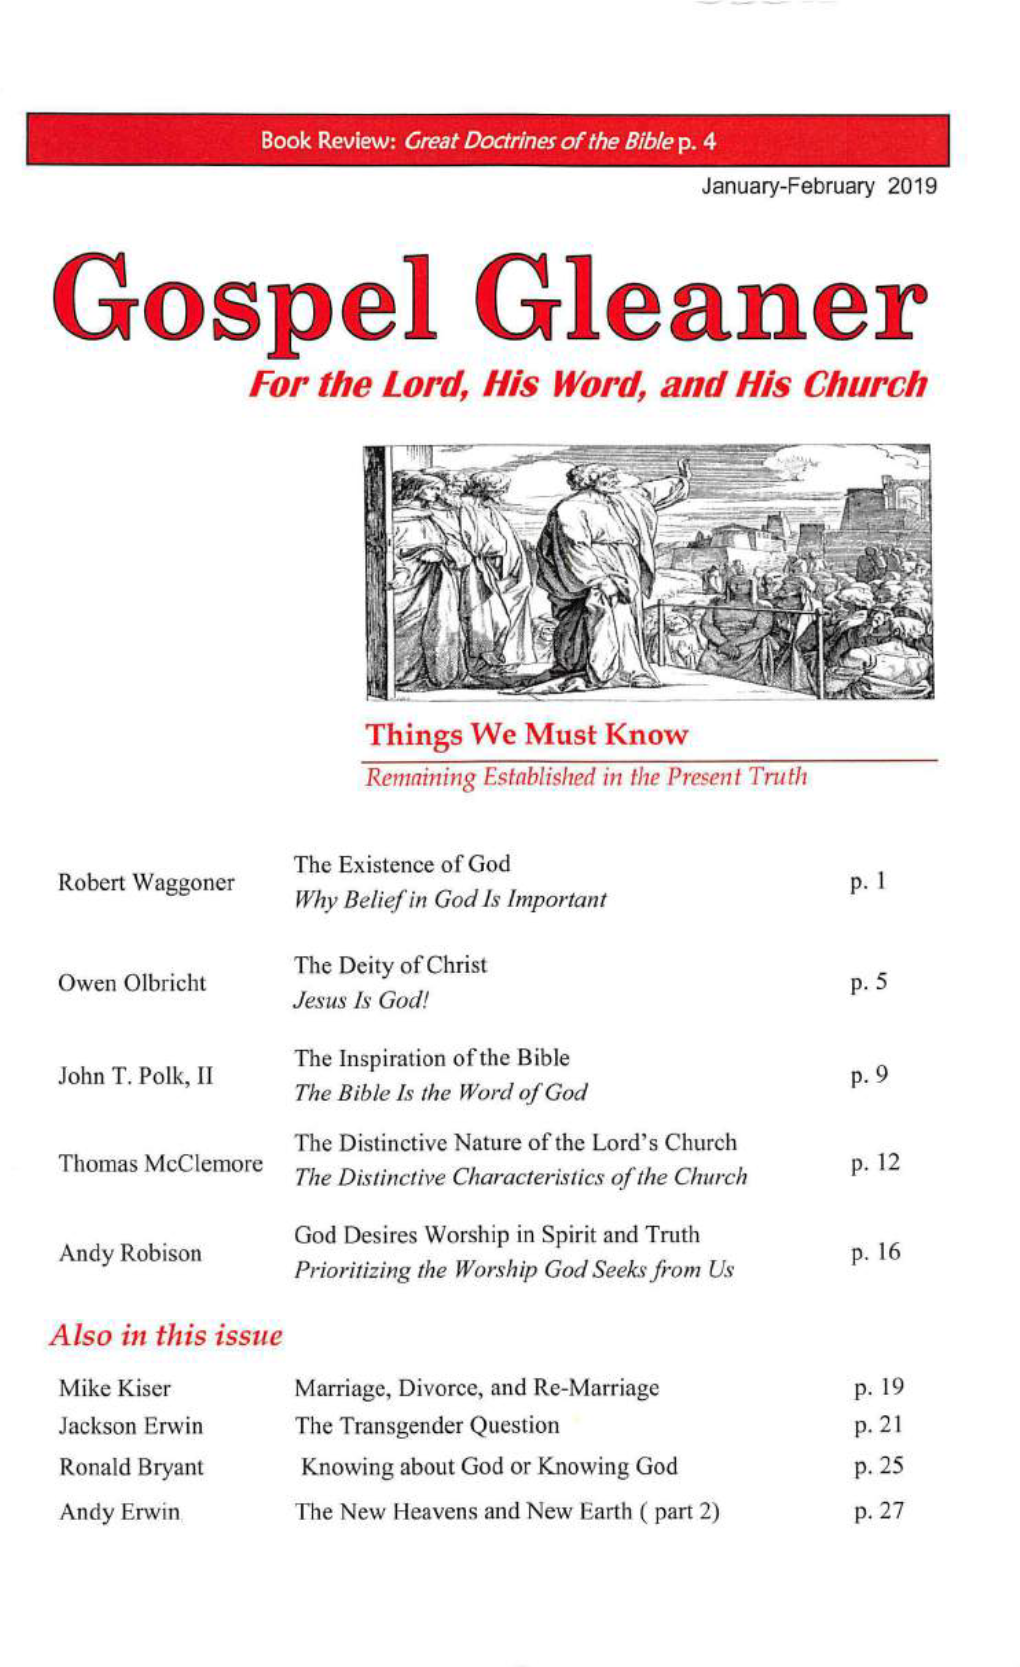 Gospel Gleaner for the Lord, His Word, and His Church